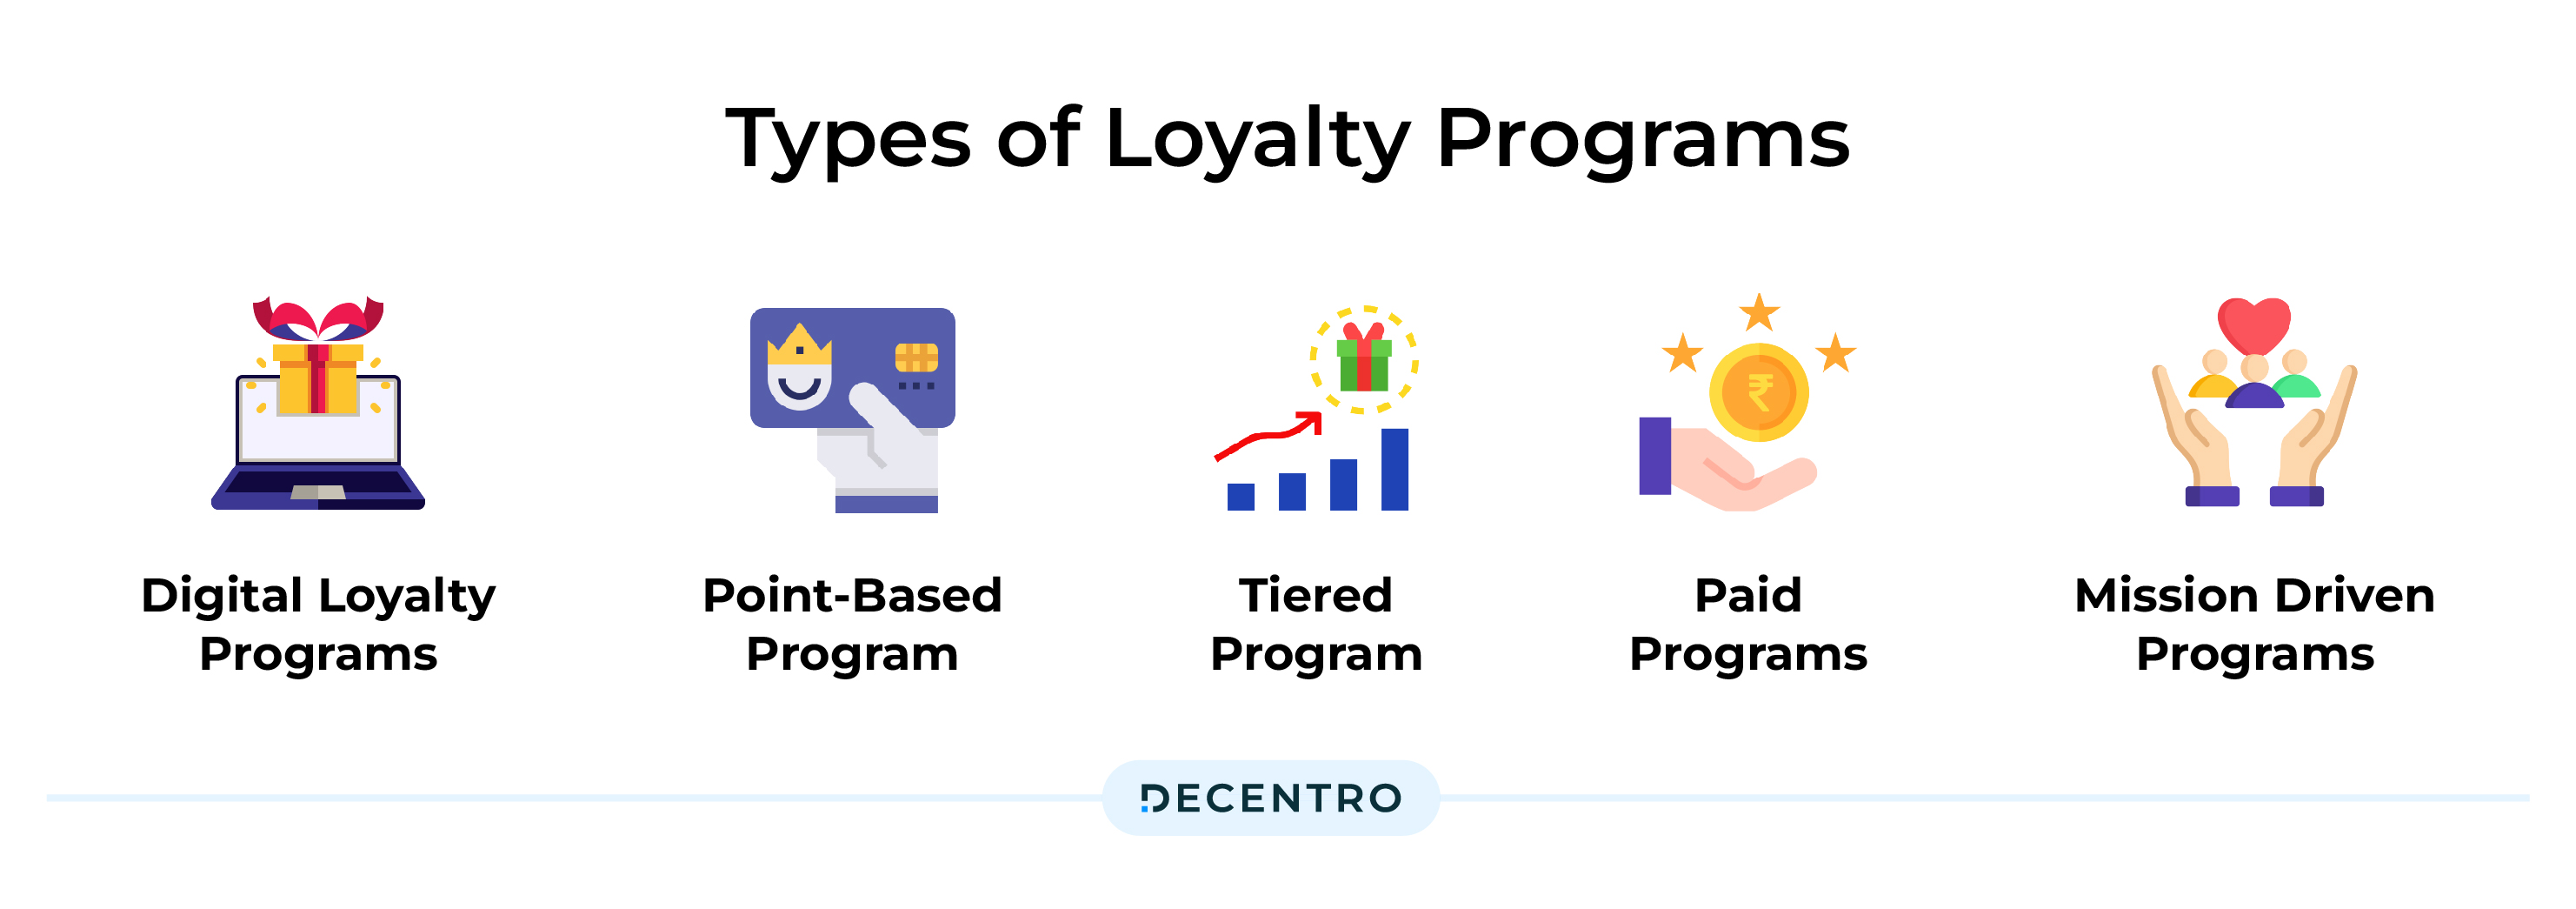 7+ Best Customer Loyalty Program Examples and How They Work - Decentro